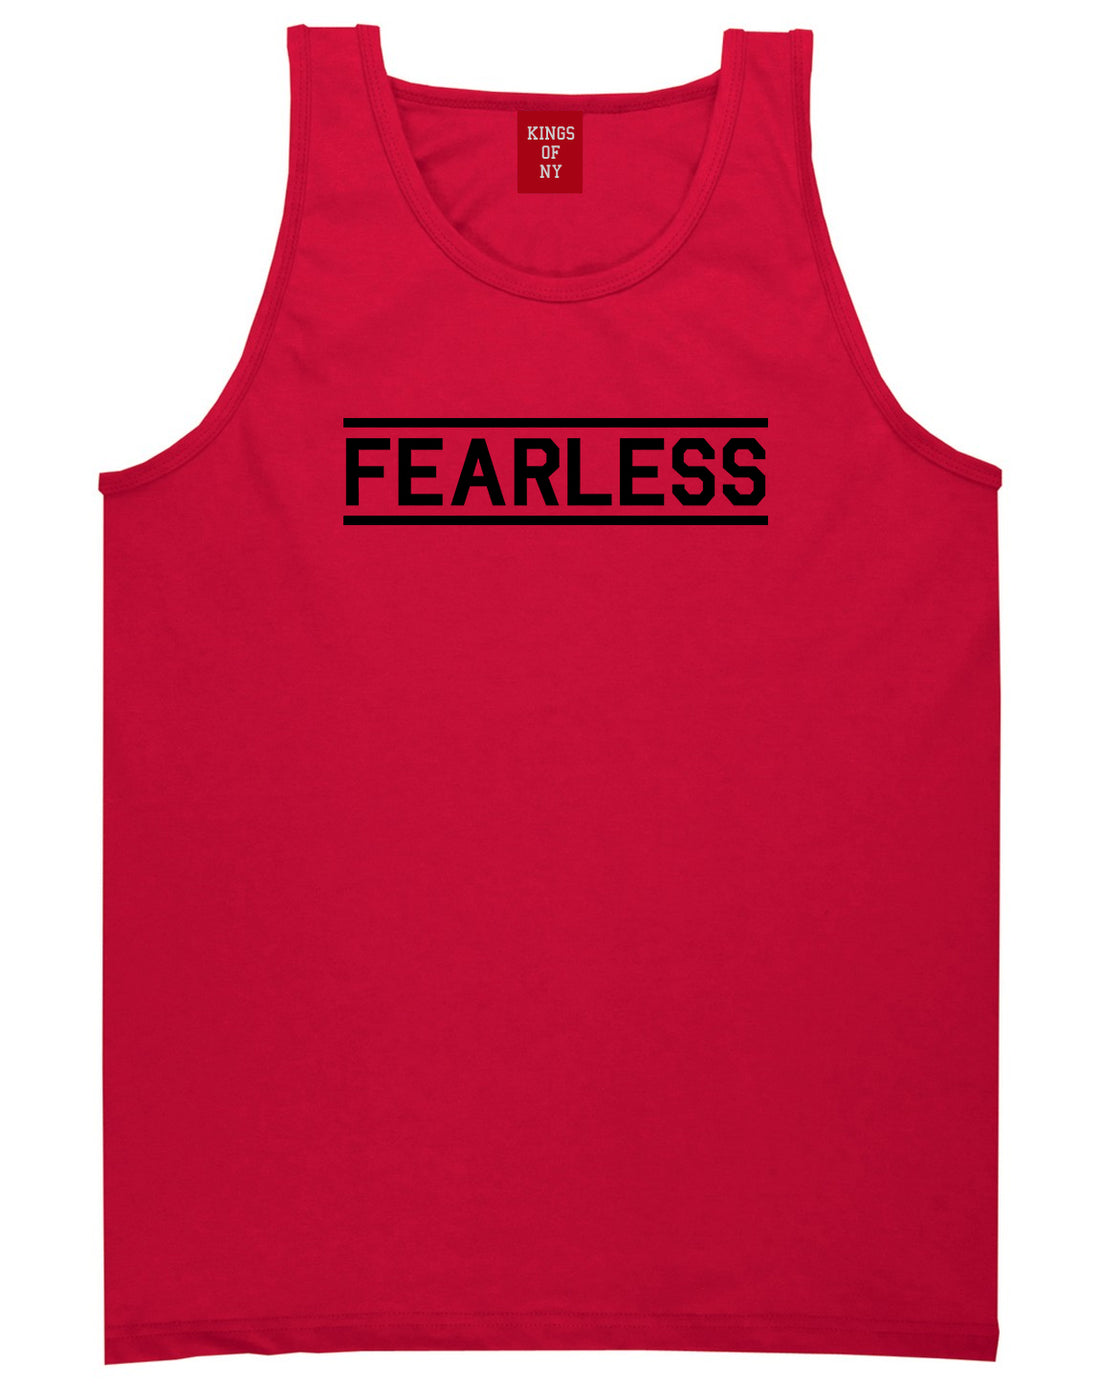 Fearless Gym Mens Red Tank Top Shirt by KINGS OF NY